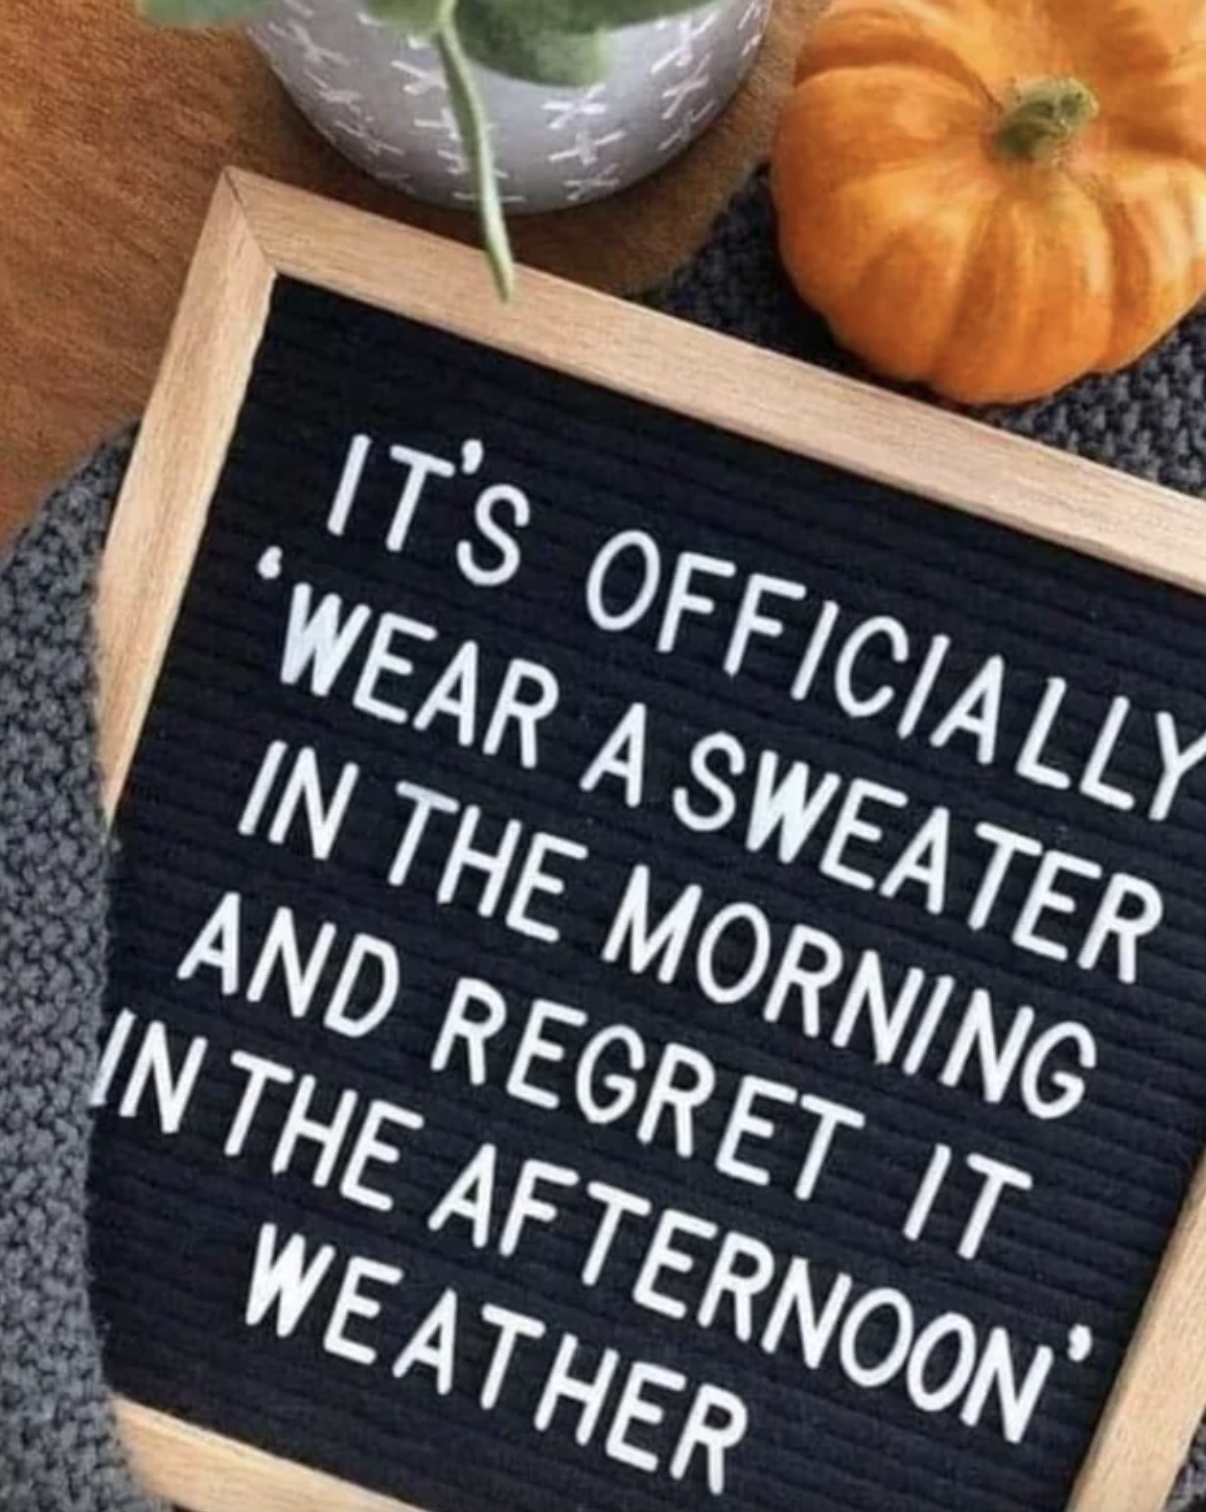 &quot;It&#x27;s officially wear a sweater in the morning and regret it in the afternoon weather&quot;